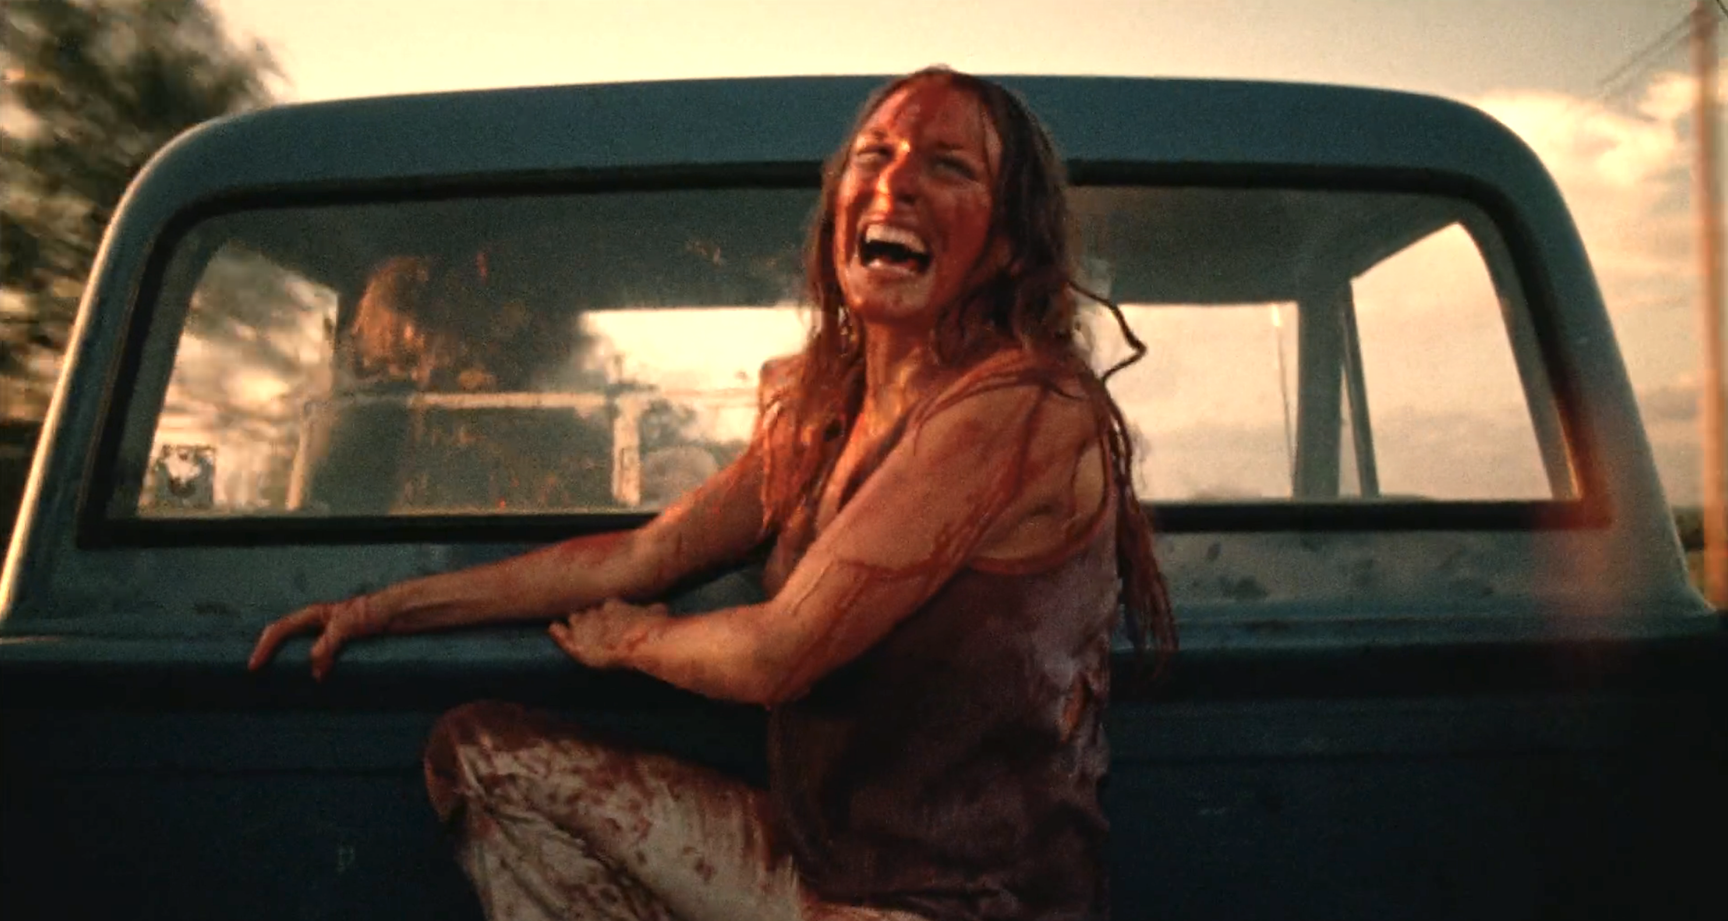 Screen shot from &quot;The Texas Chain Saw Massacre&quot;